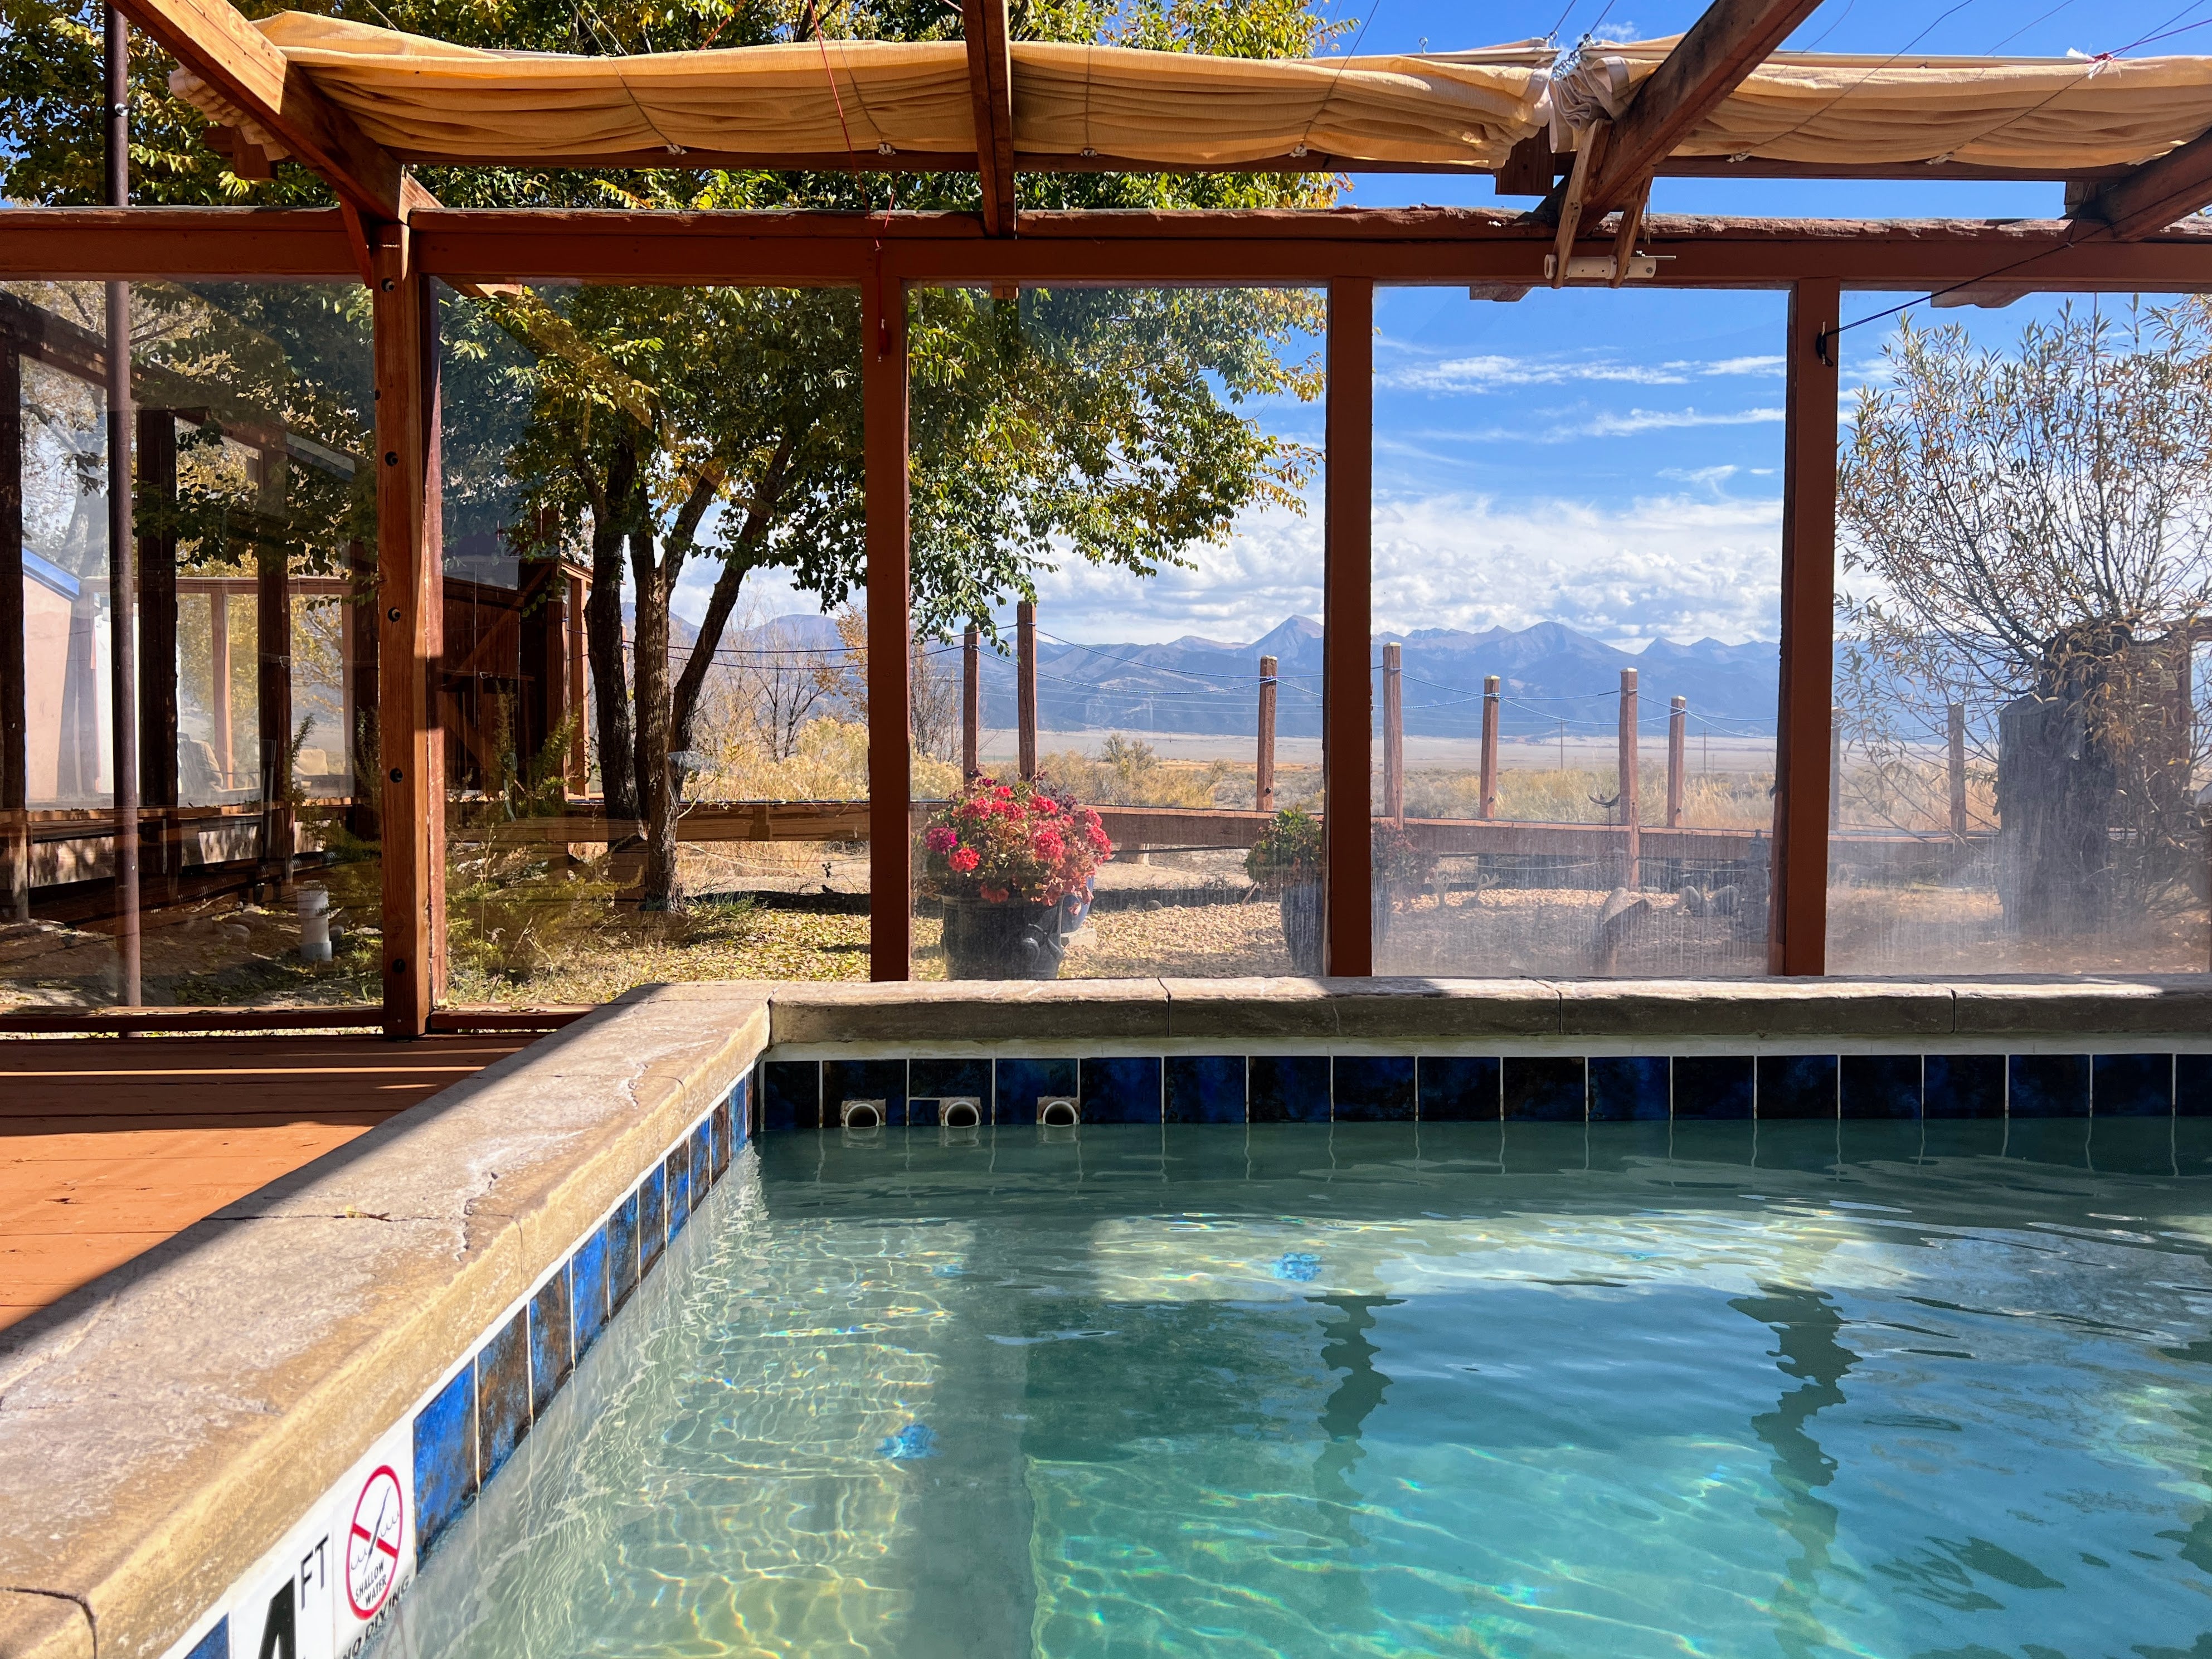 A soak with a view at Joyful Journey Hot Springs